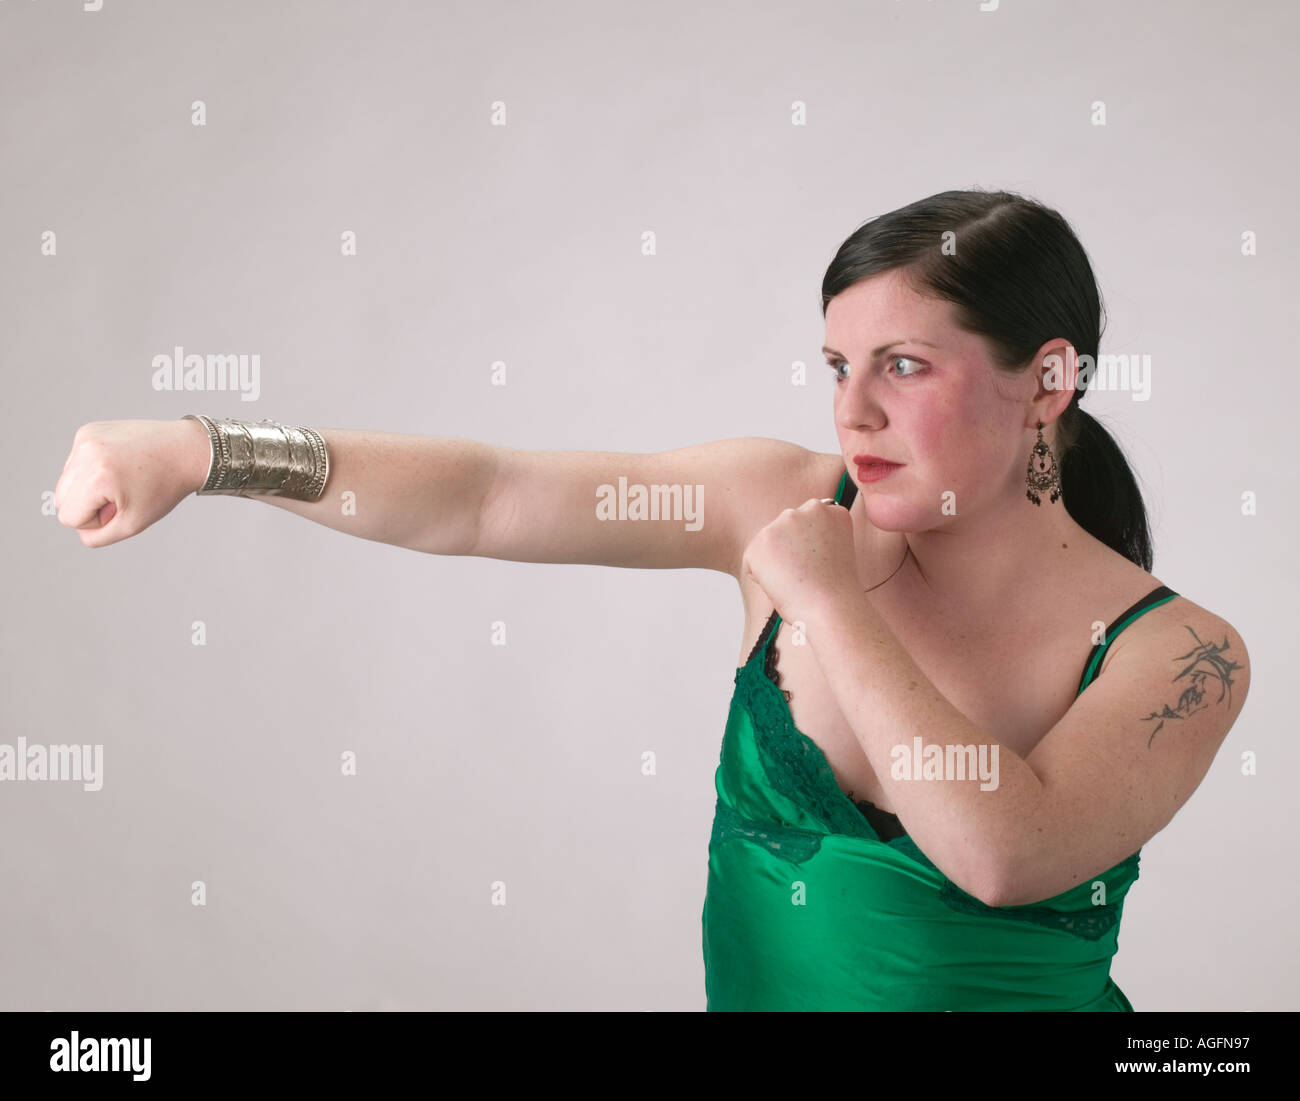 Woman in negligee shadow boxing Stock Photo